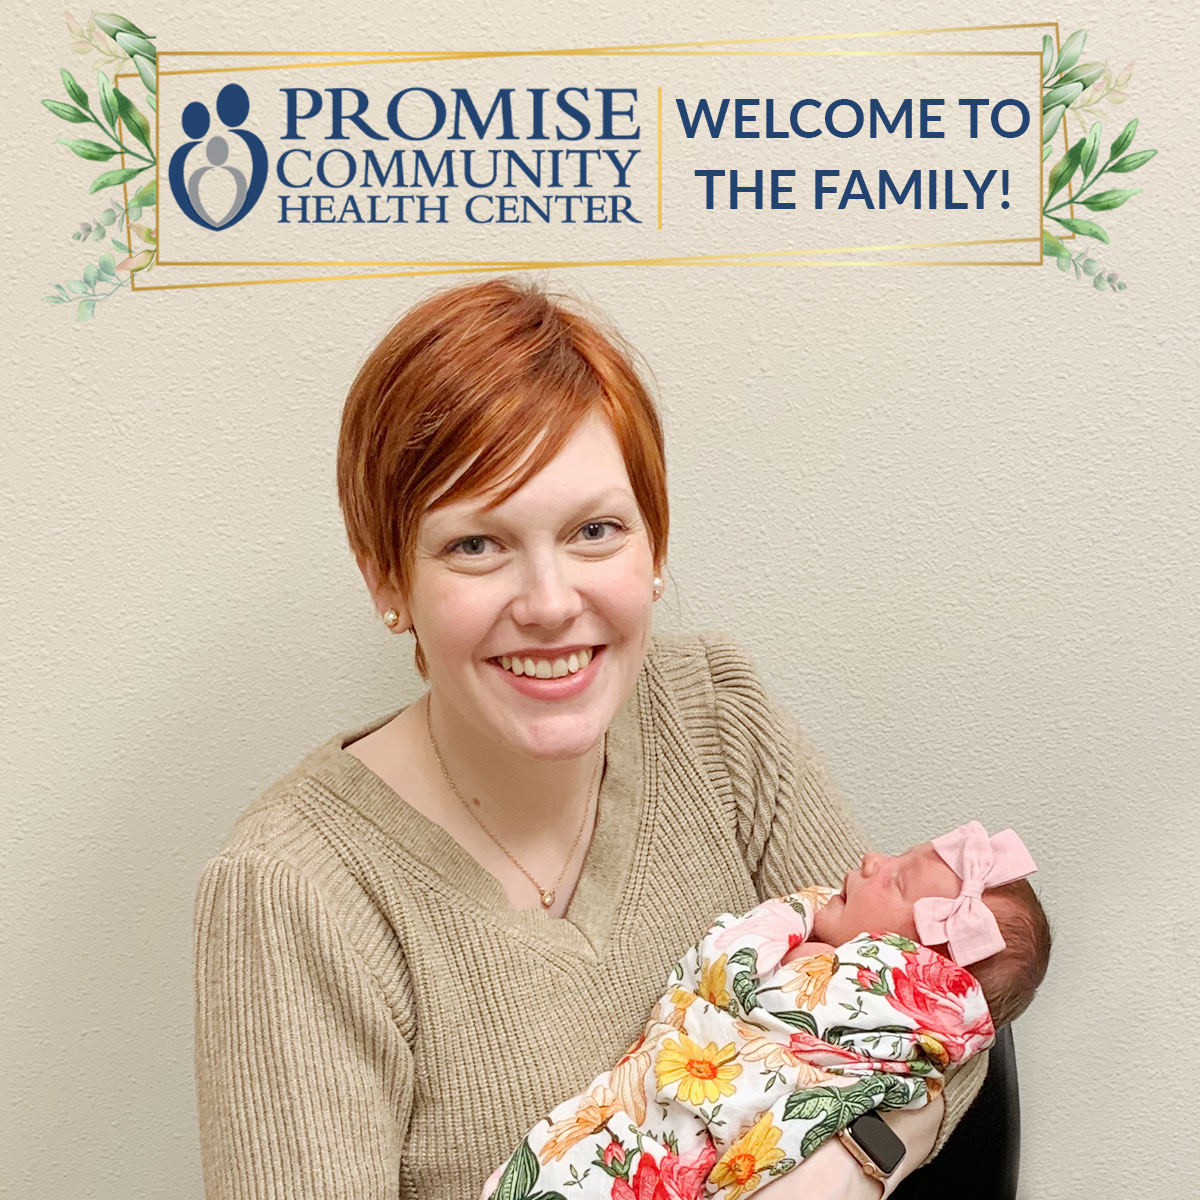 Powell Family Home Birth in Sioux Center, Iowa | Promise Community Health Center in Sioux Center, Iowa | Home births in northwest Iowa, Home births in southeast South Dakota, Home births in southwest Minnesota | Home births in Sioux Falls South Dakota, Home births in Beresford South Dakota, Home births in Sioux City IA, Home births in LeMars IA, Home births in Worthington MN, Home births in Iowa, Home births in South Dakota, Home births in Minnesota